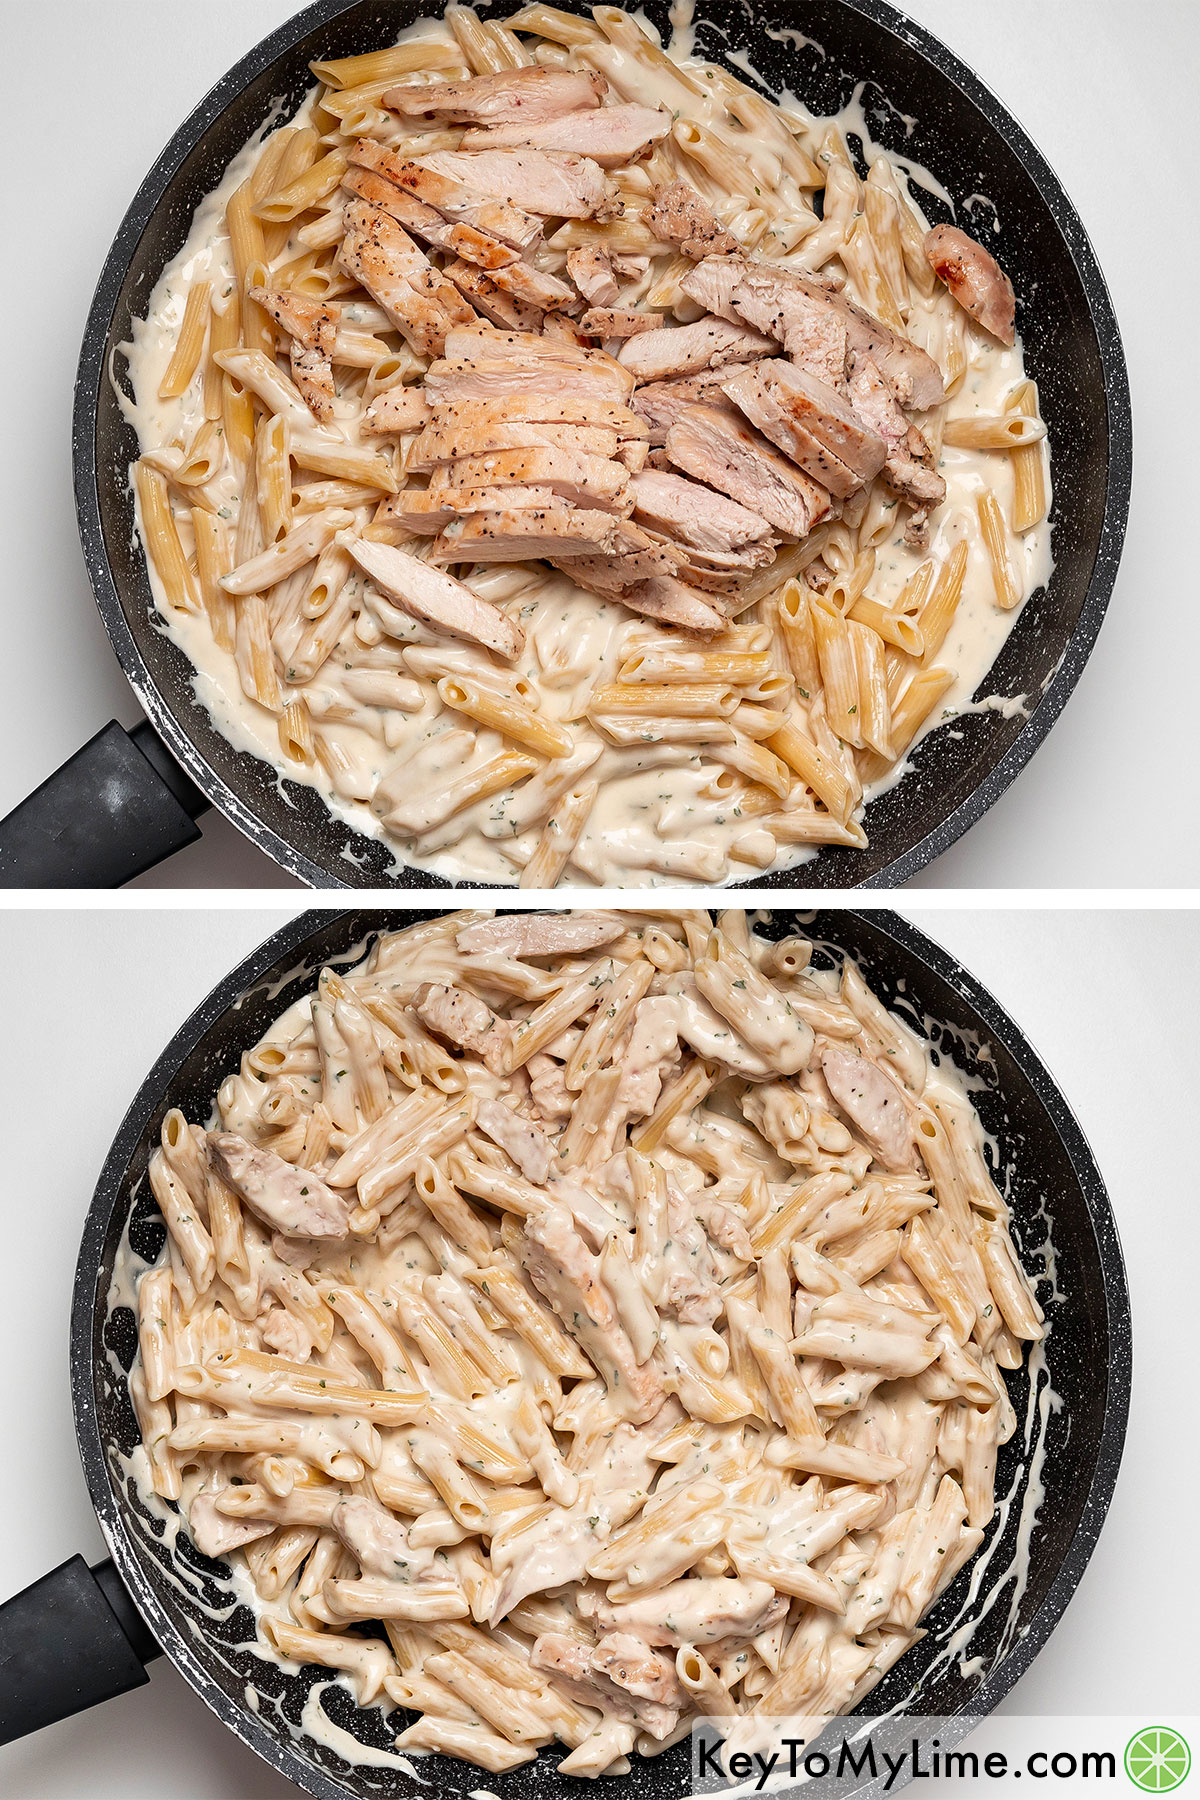 Tossing the noodles throughout the sauce then adding chicken and tossing until everything is completely coated.